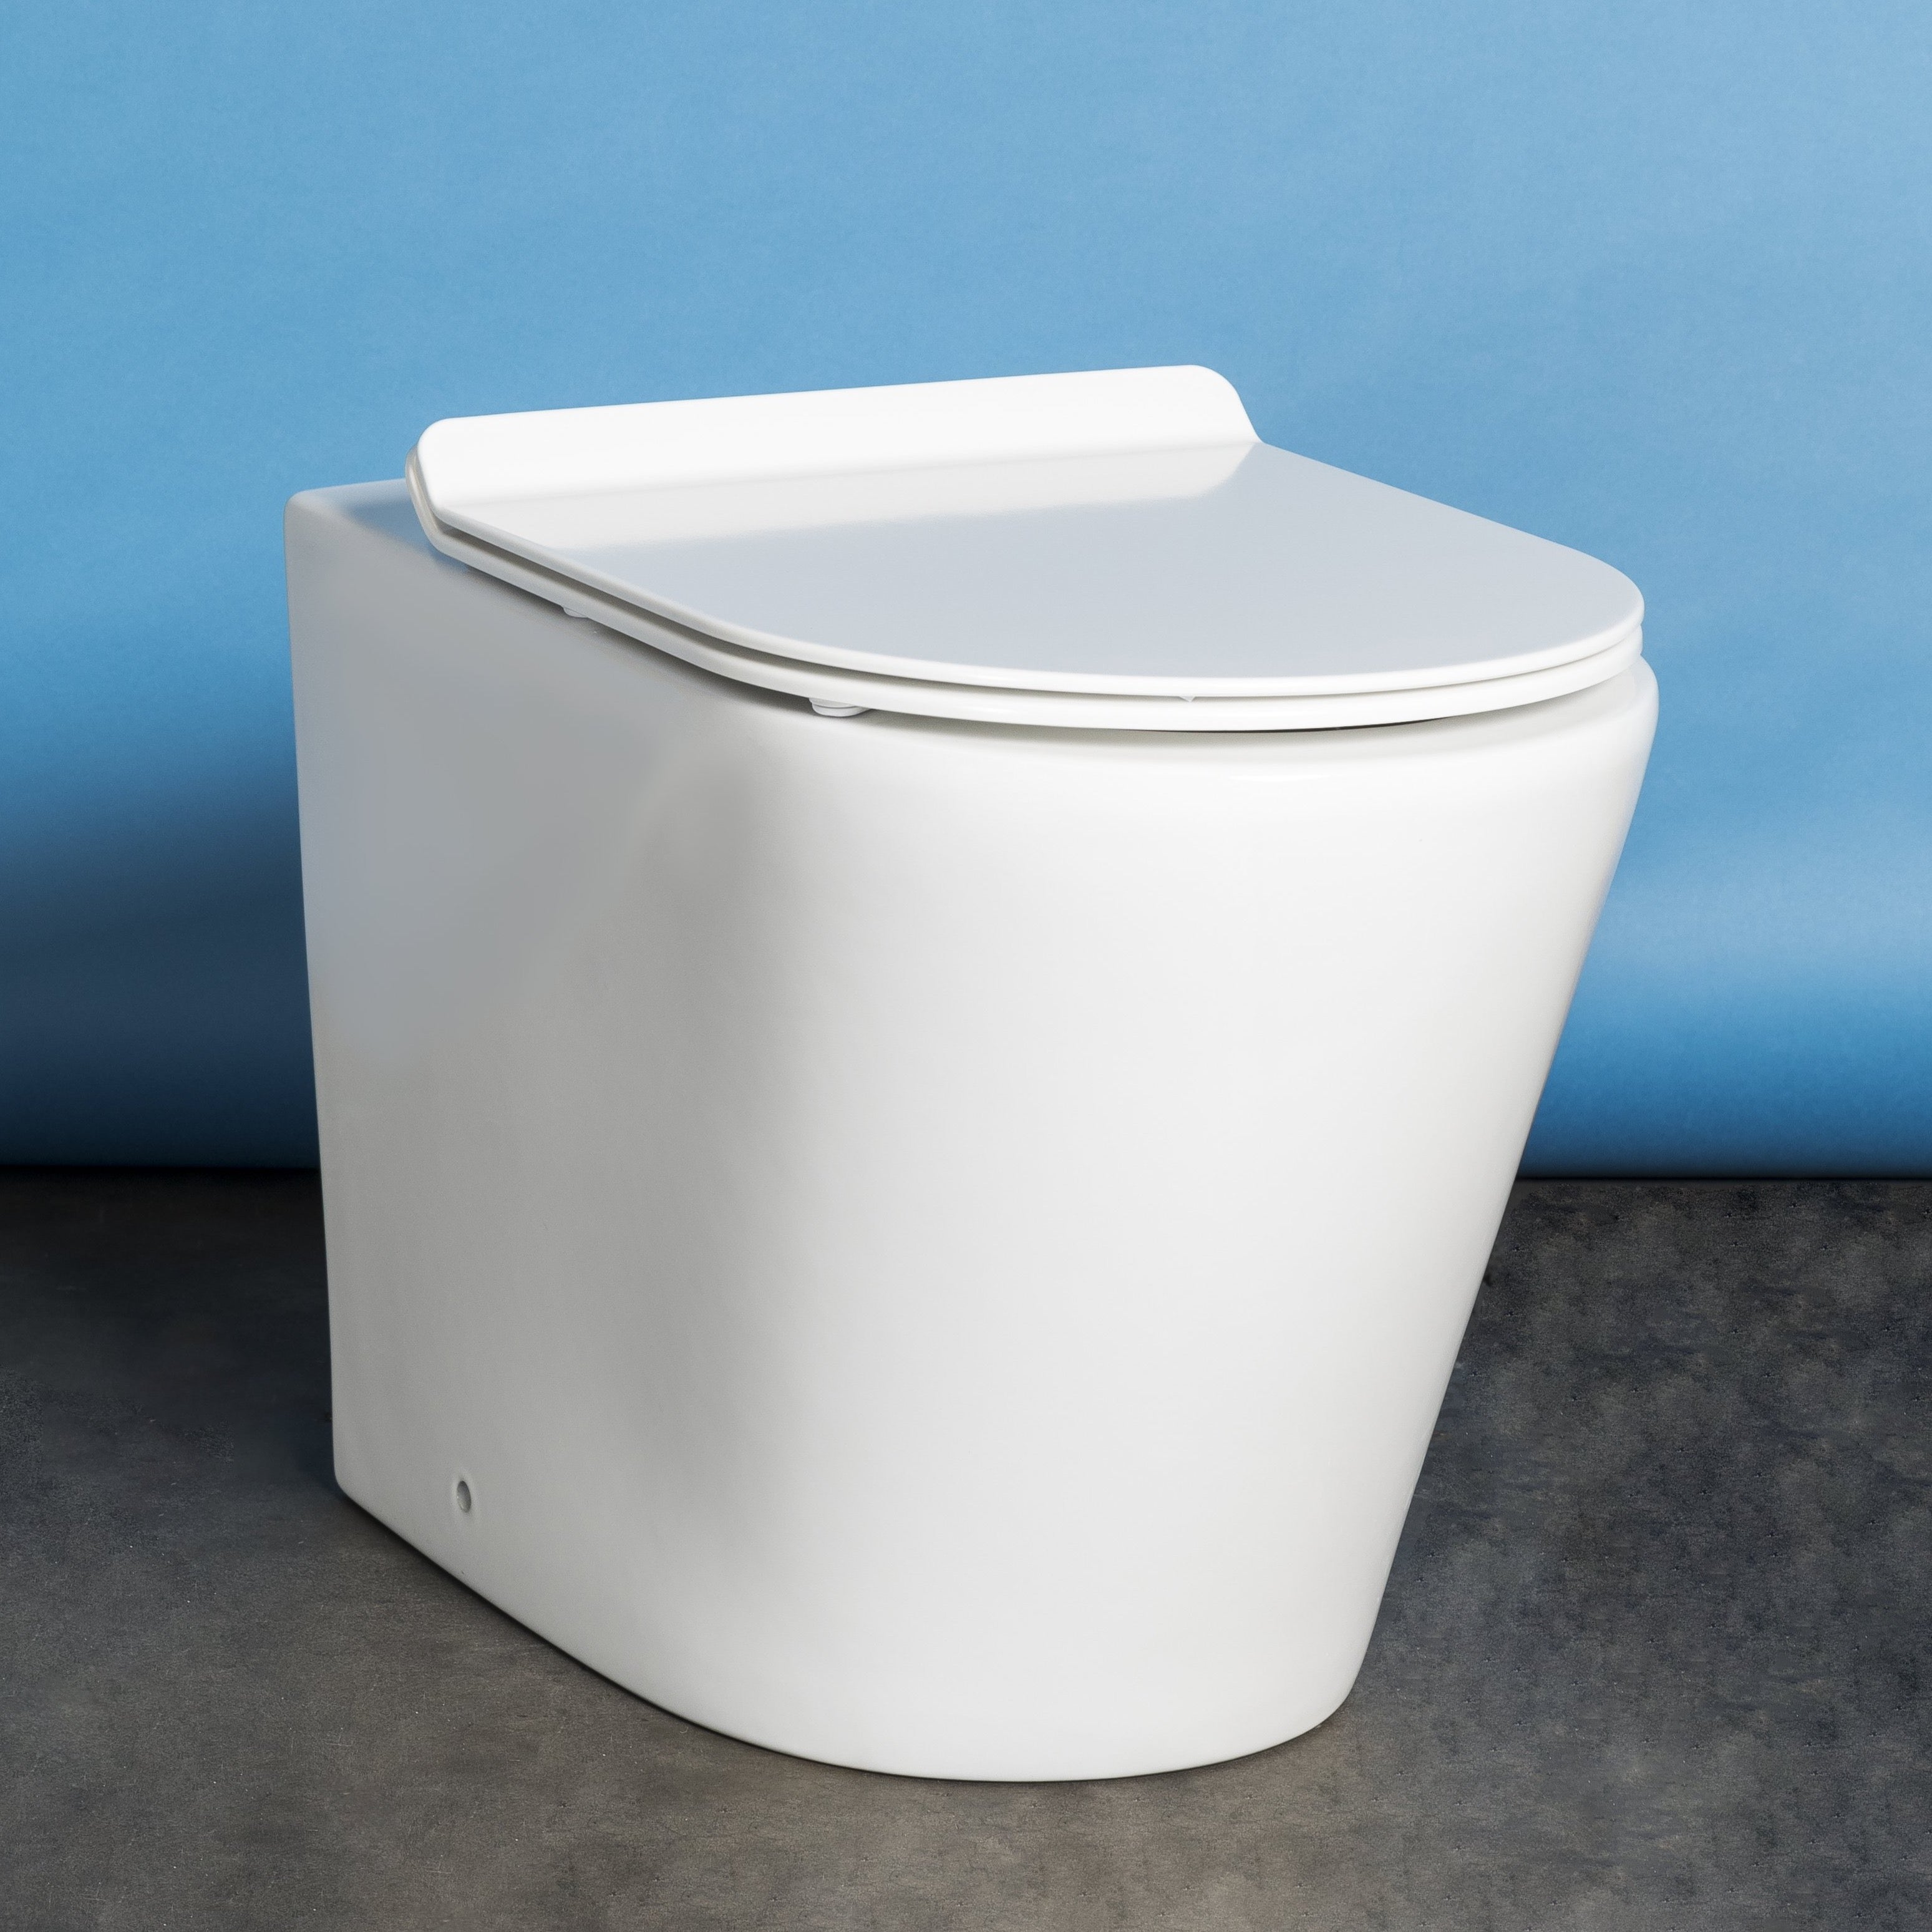 The Eyre Rimless Concealed Cistern Toilet